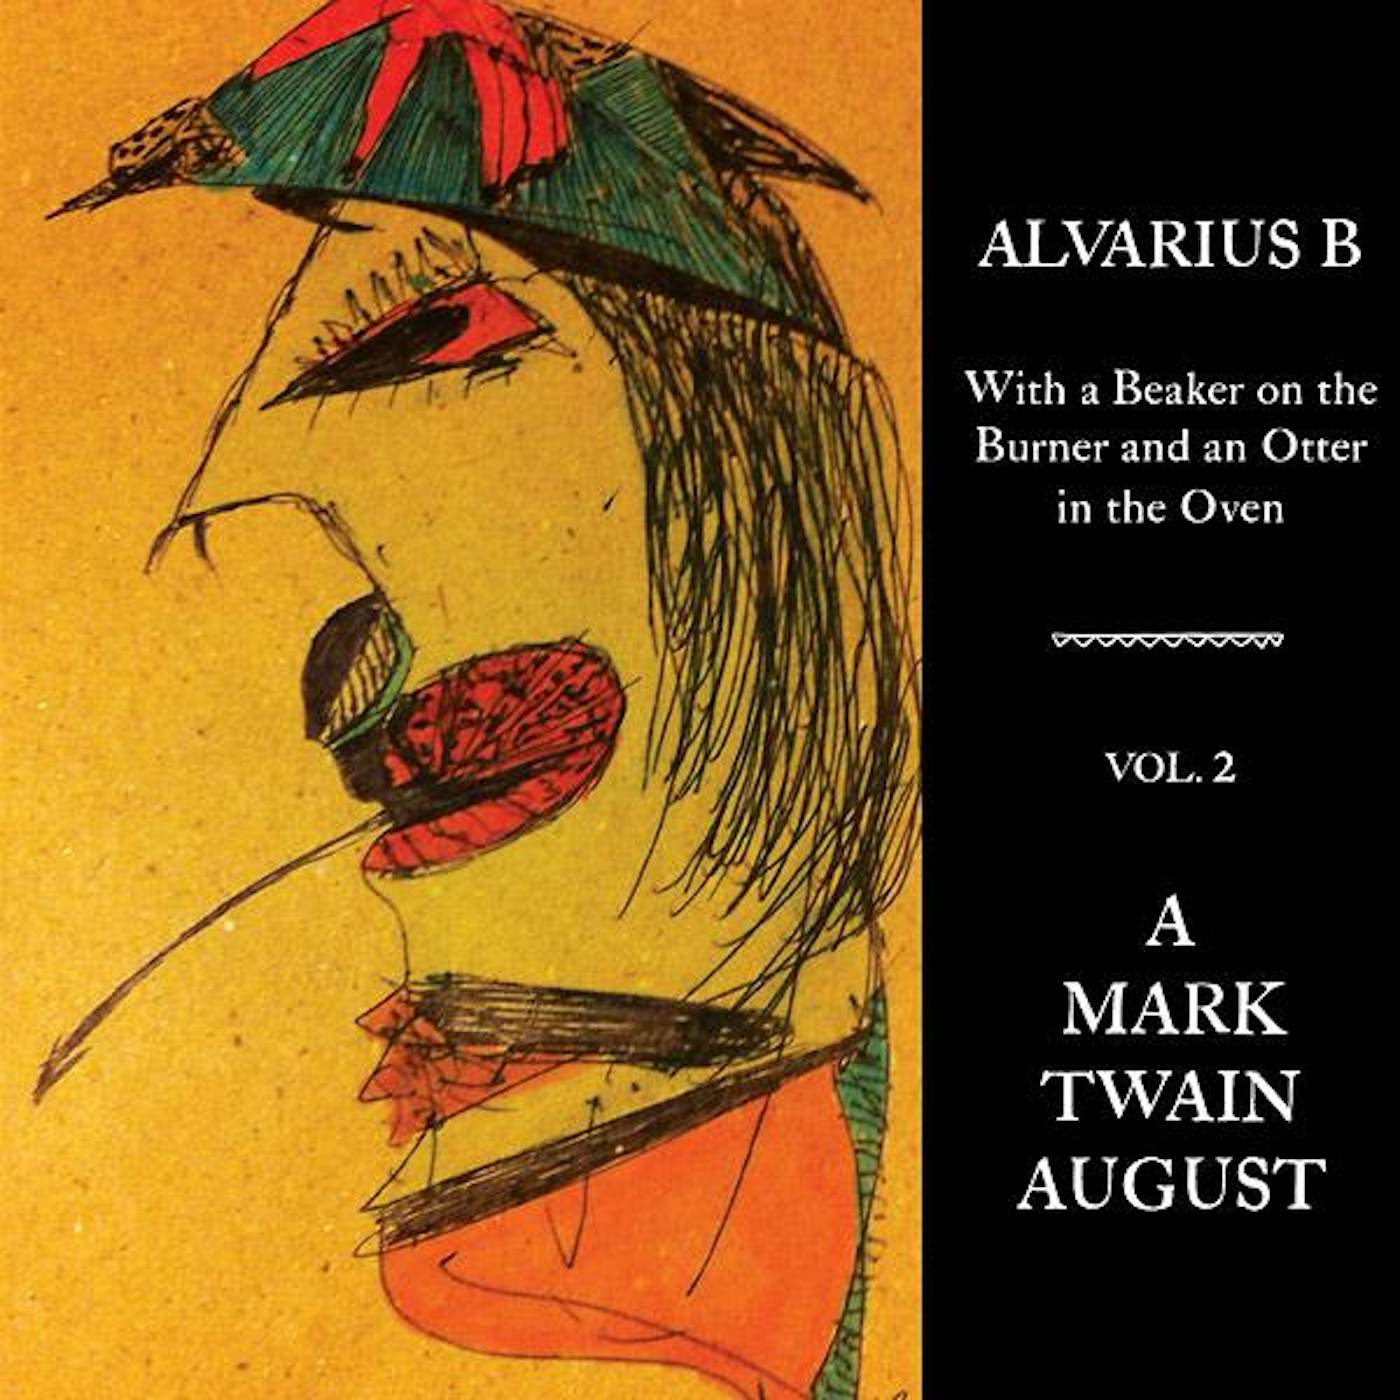 Alvarius B. 'With a Beaker on the Burner and an Otter in the Oven - Vol. 2 A Mark Twain August' Vinyl LP Vinyl Record